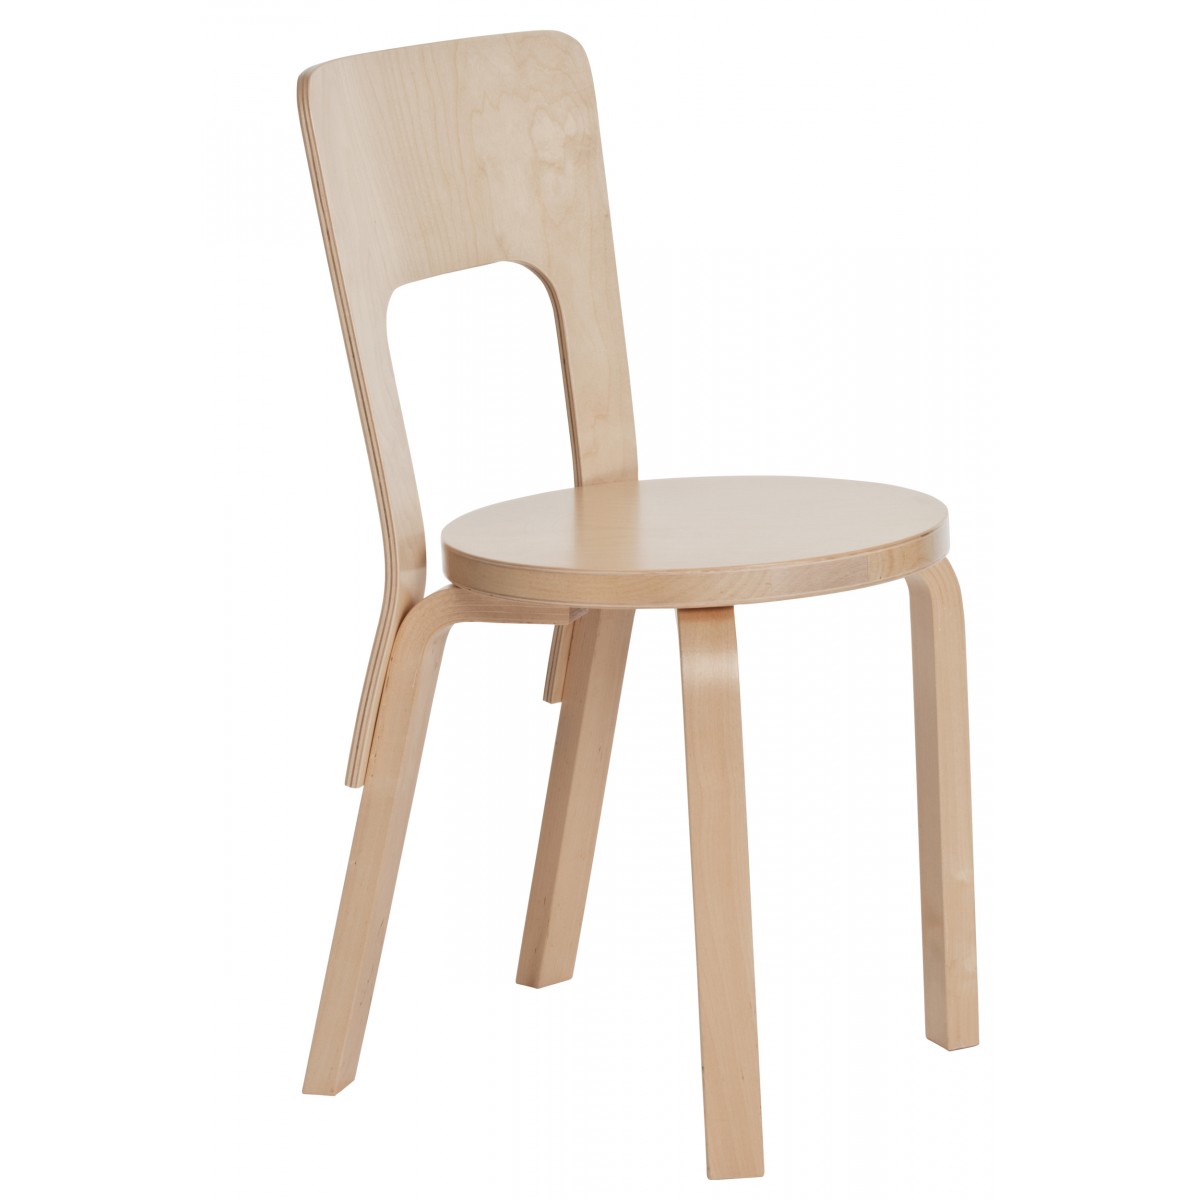 birch natural lacquered - 66 chair